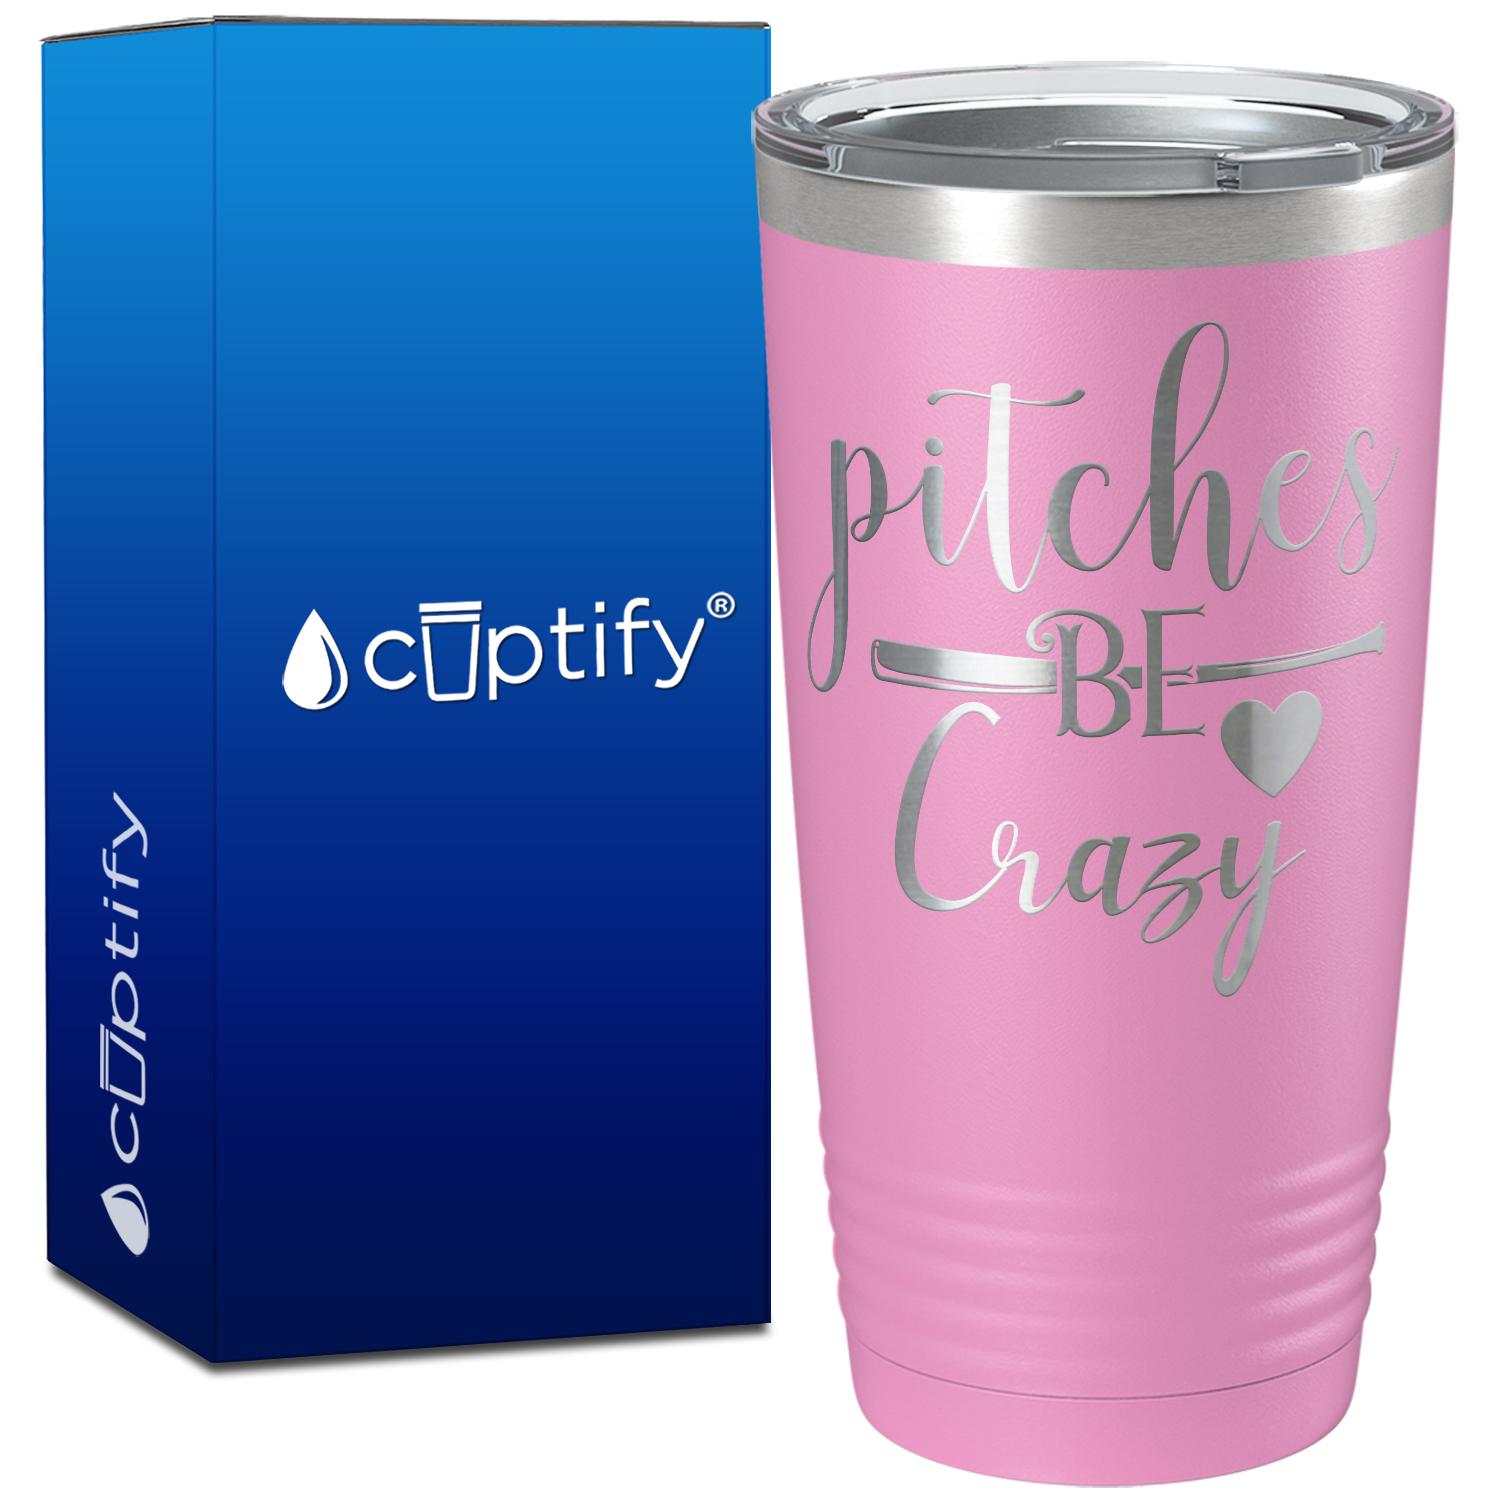 Pitches Be Crazy on 20oz Tumbler